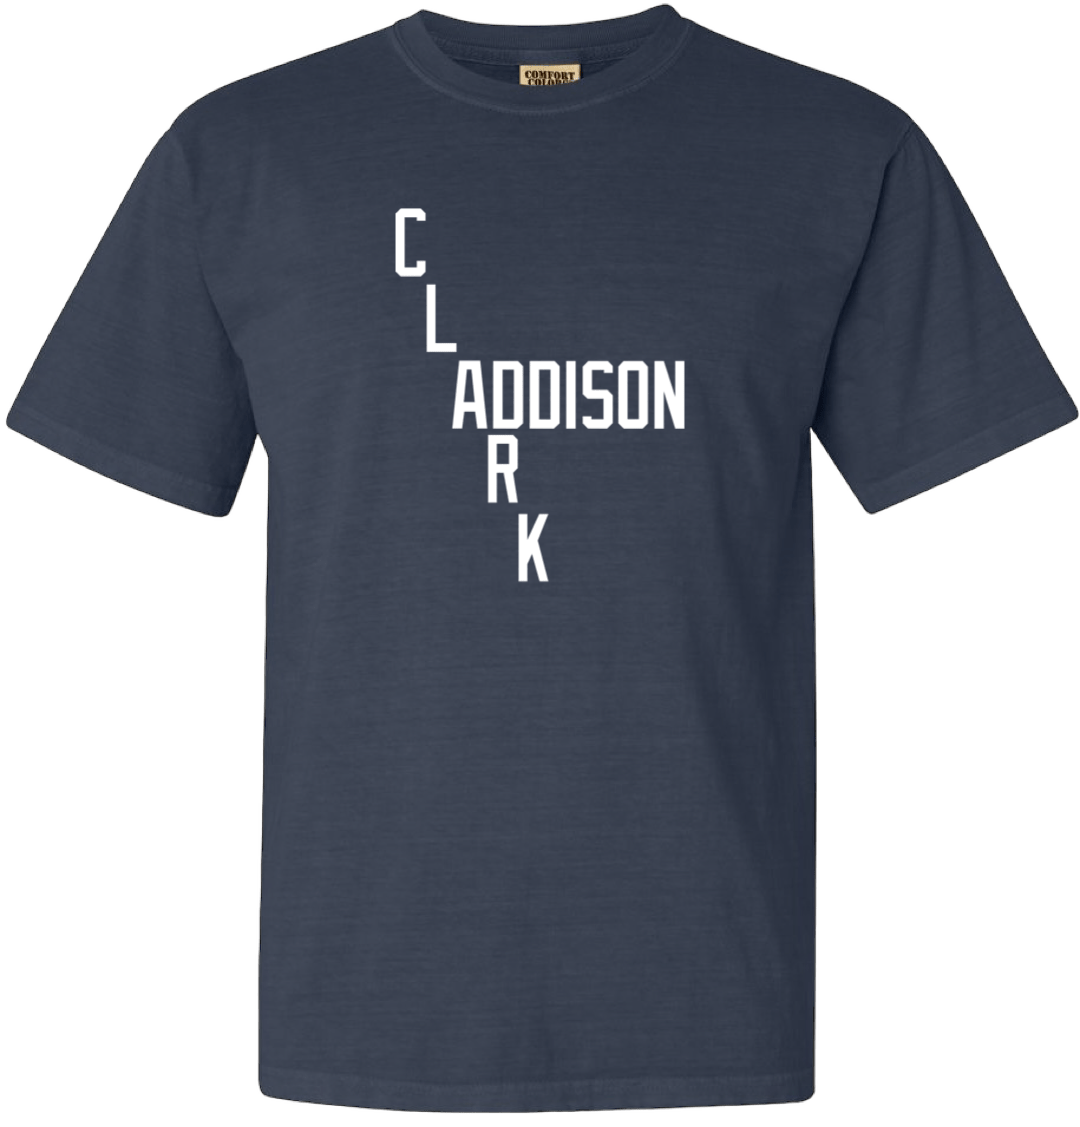 CLARK AND ADDISON COMFORT COLORS. - OBVIOUS SHIRTS